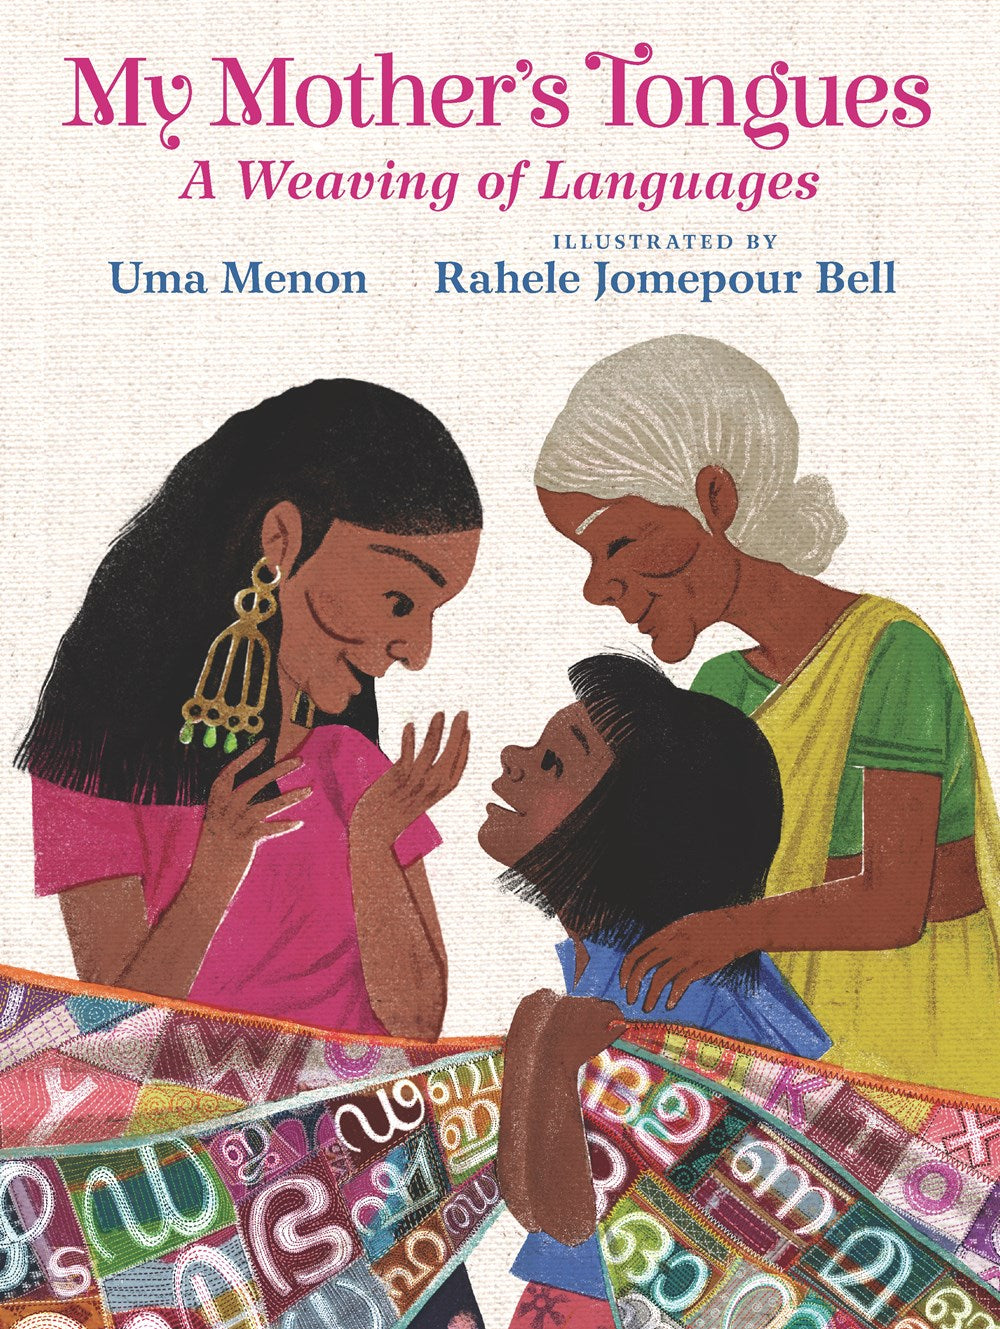 PRE-ORDER: My Mother's Tongues: A Weaving of Languages